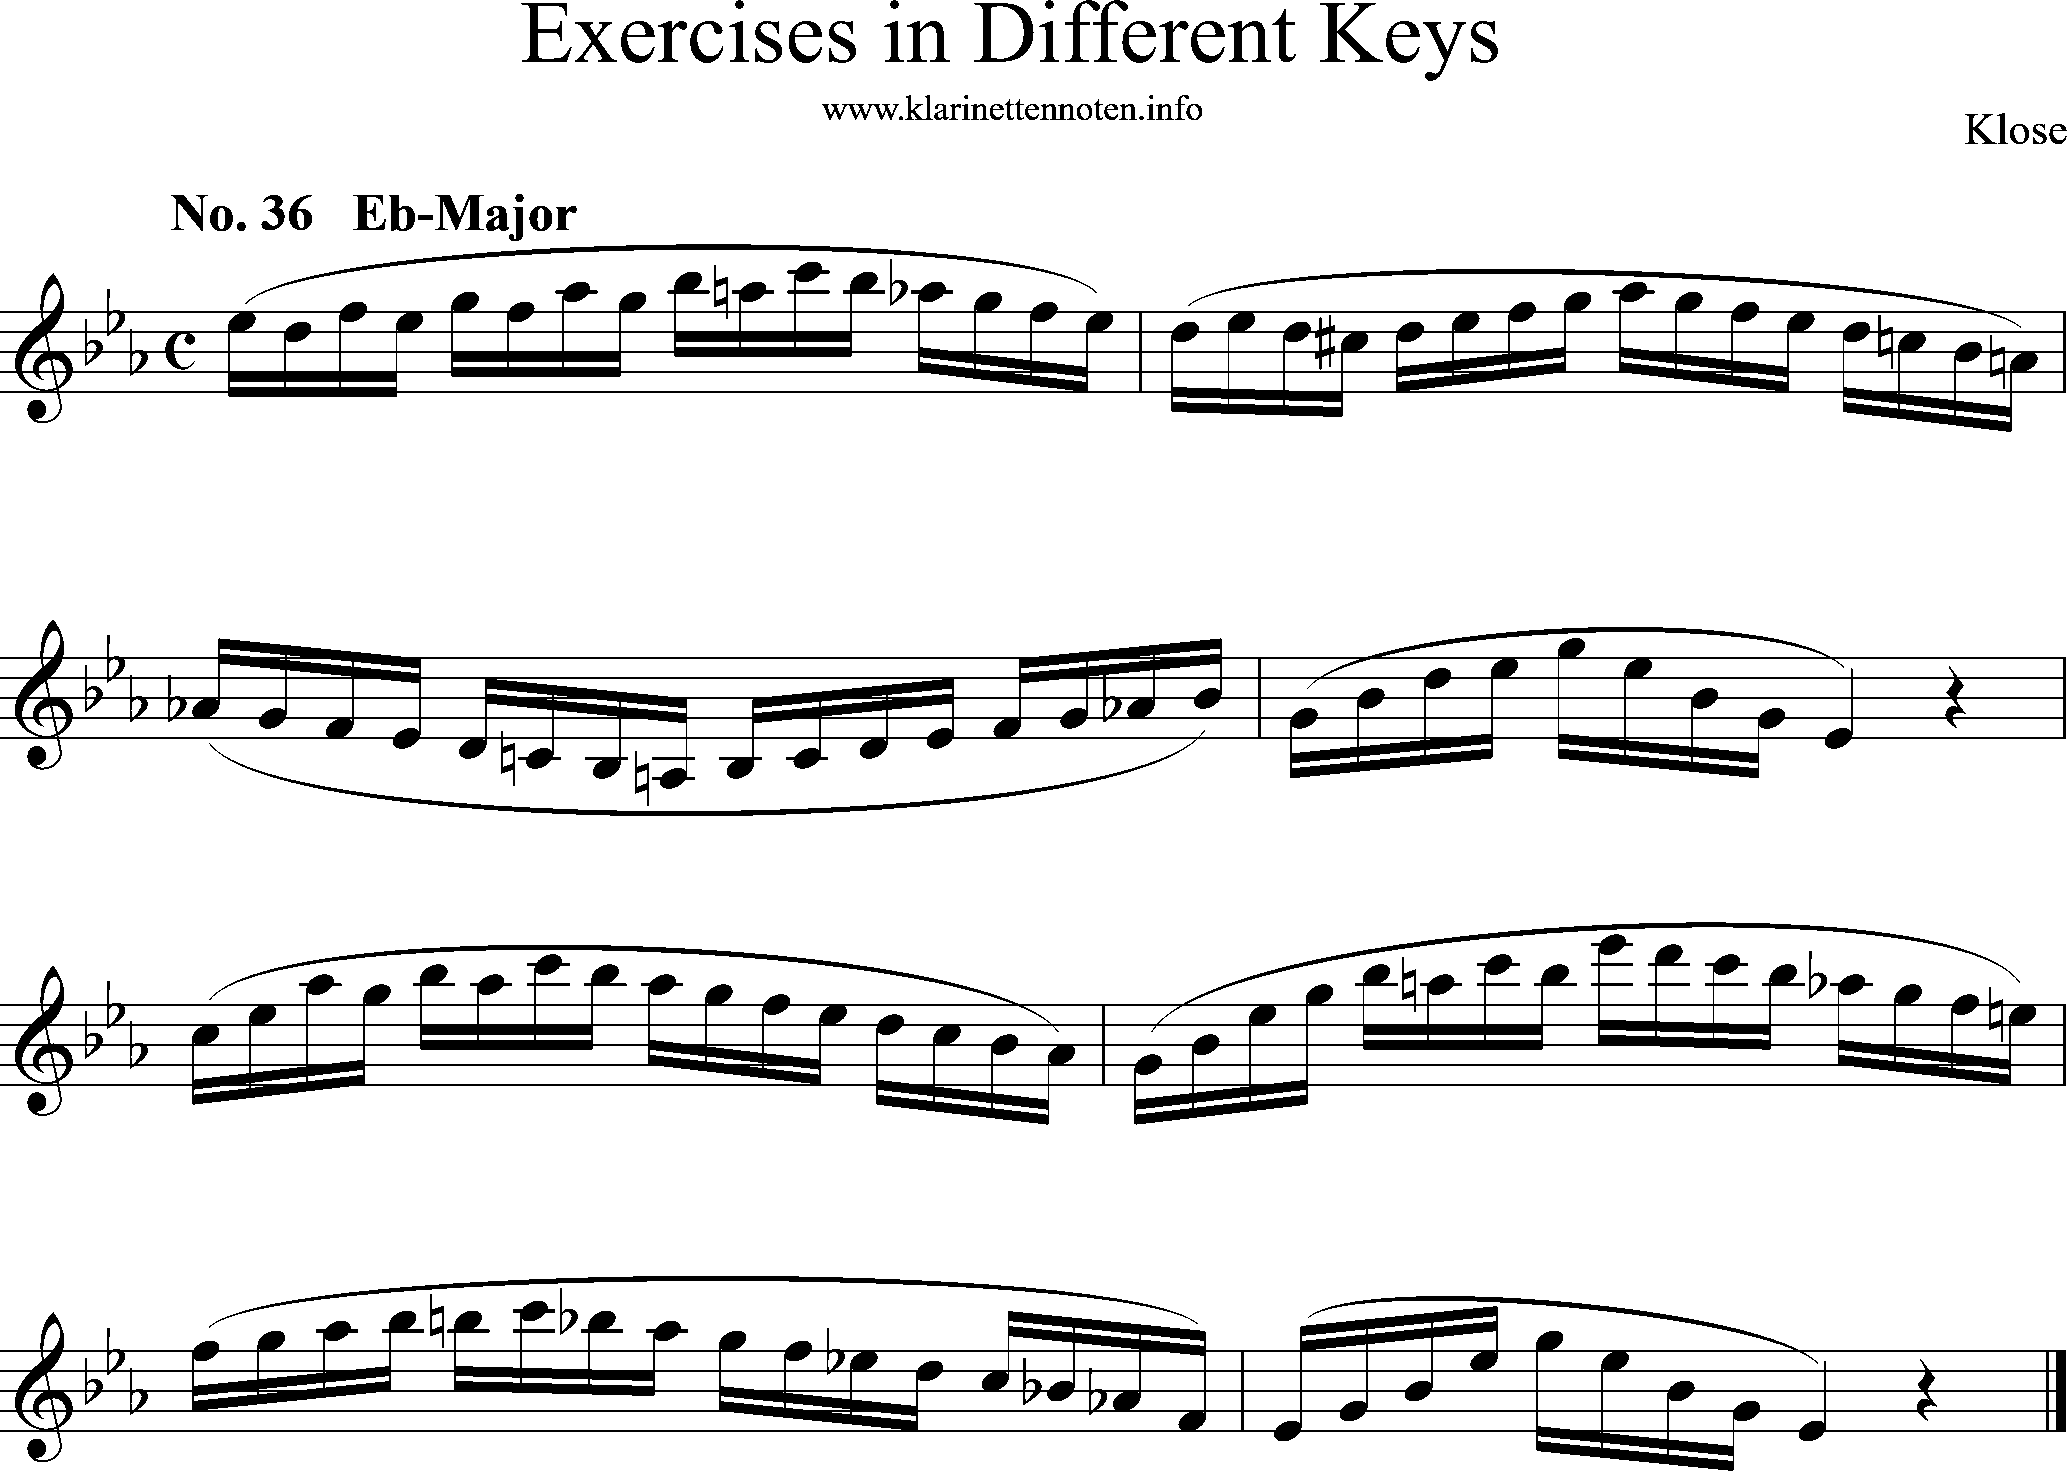 Exercises in Differewnt Keys, klose, No-36, Eb-Major